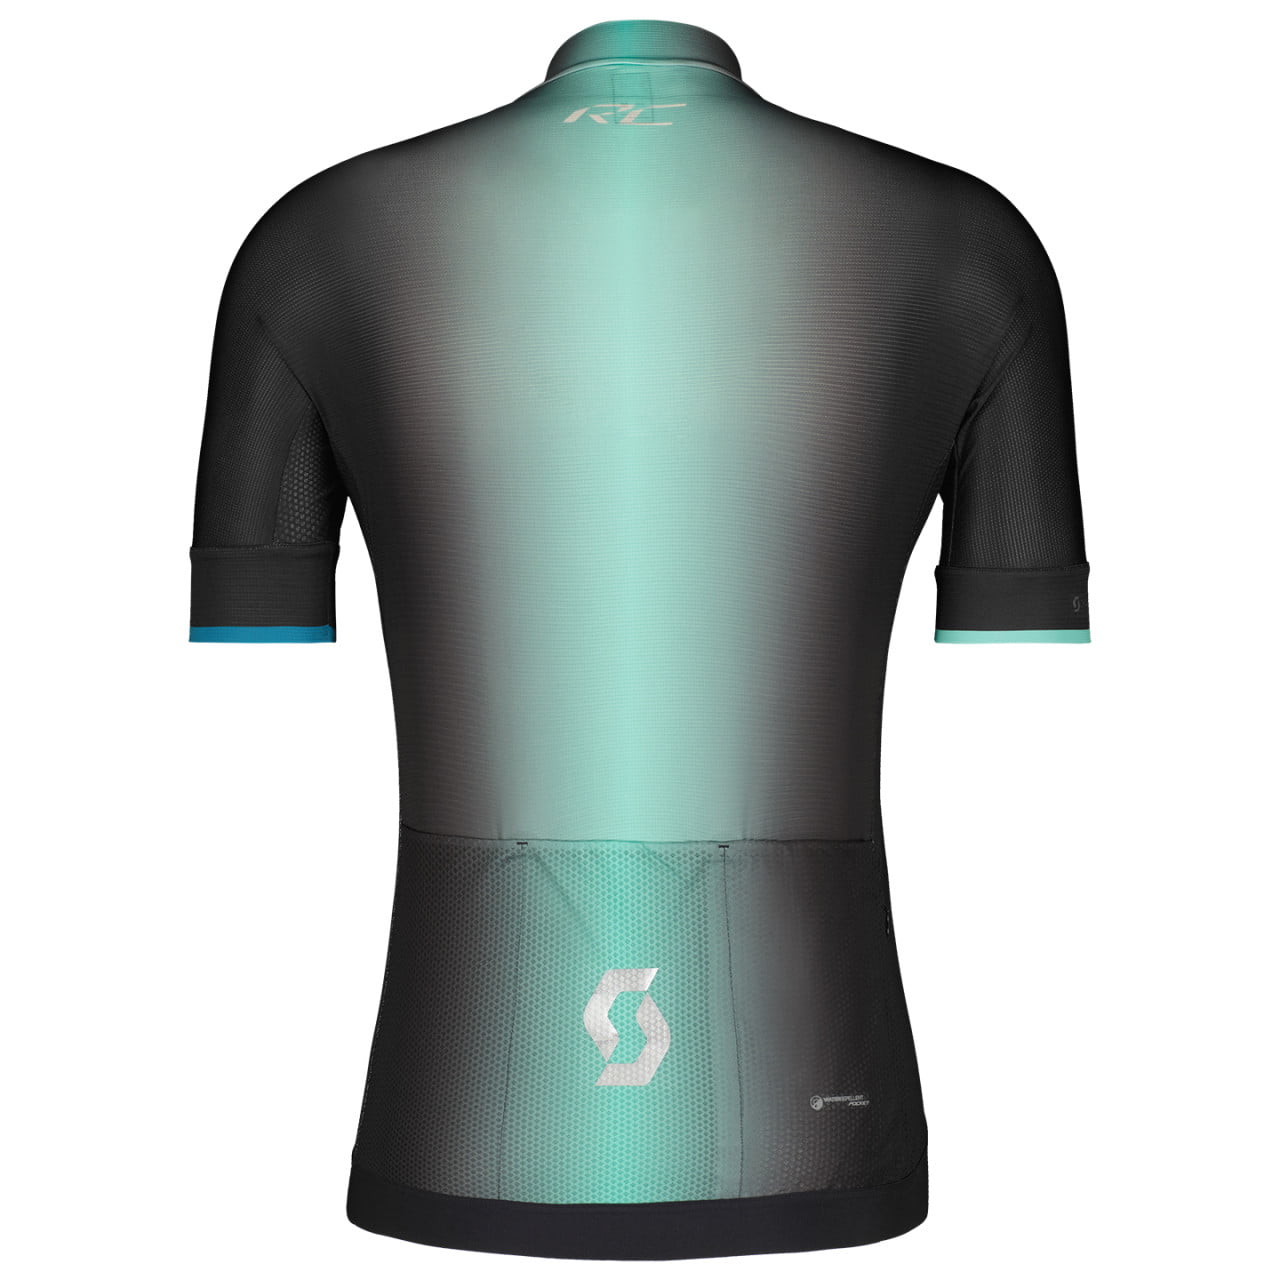 RC Pro Supersonic Edt. Short Sleeve Jersey